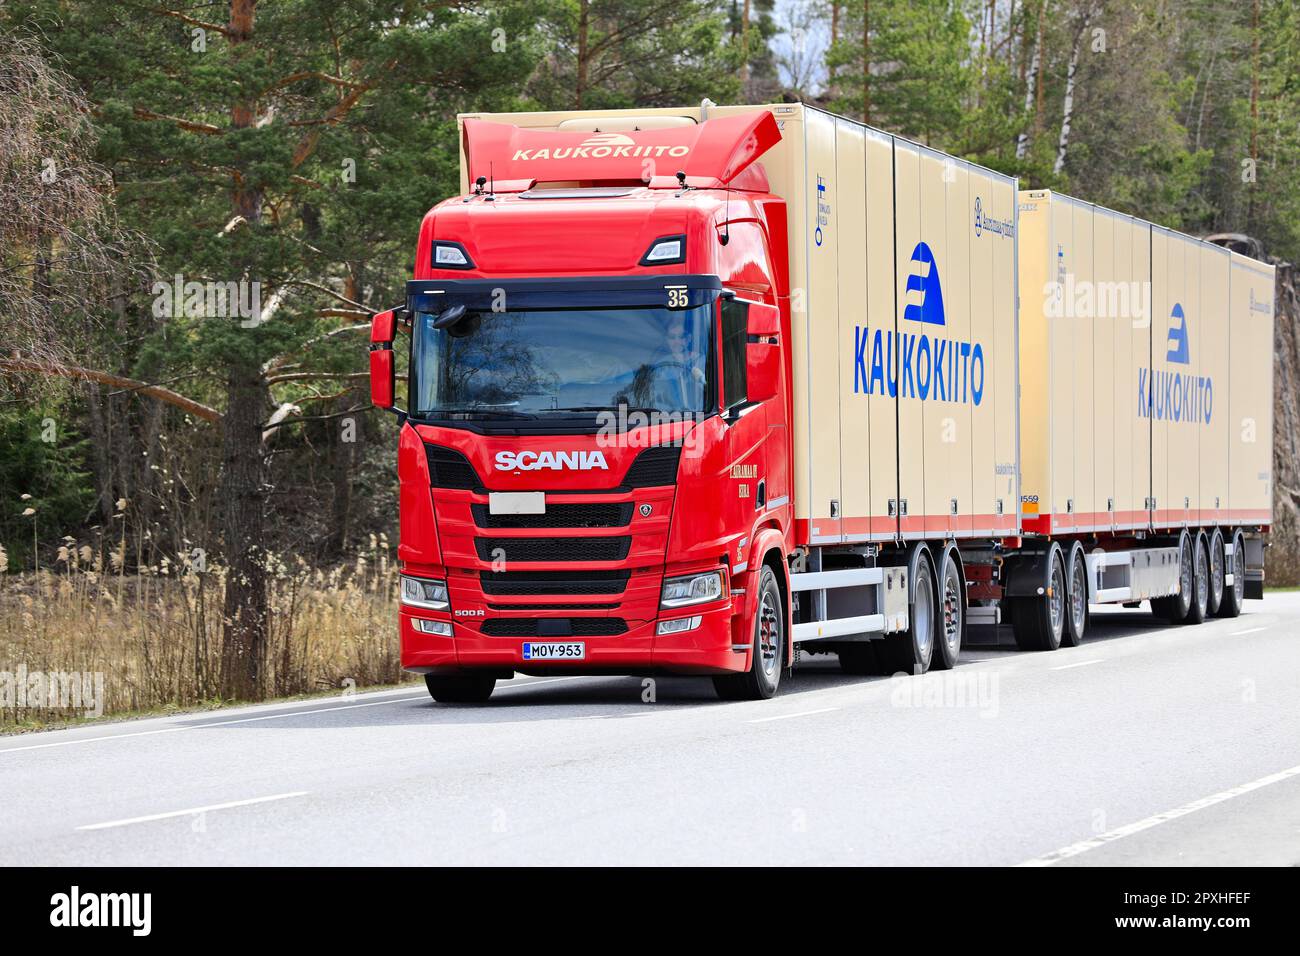 Red Scania 500R truck Kaukokiito pulling high capacity transport trailer in traffic on road 52. Salo, Finland. April 27, 2023. Stock Photo